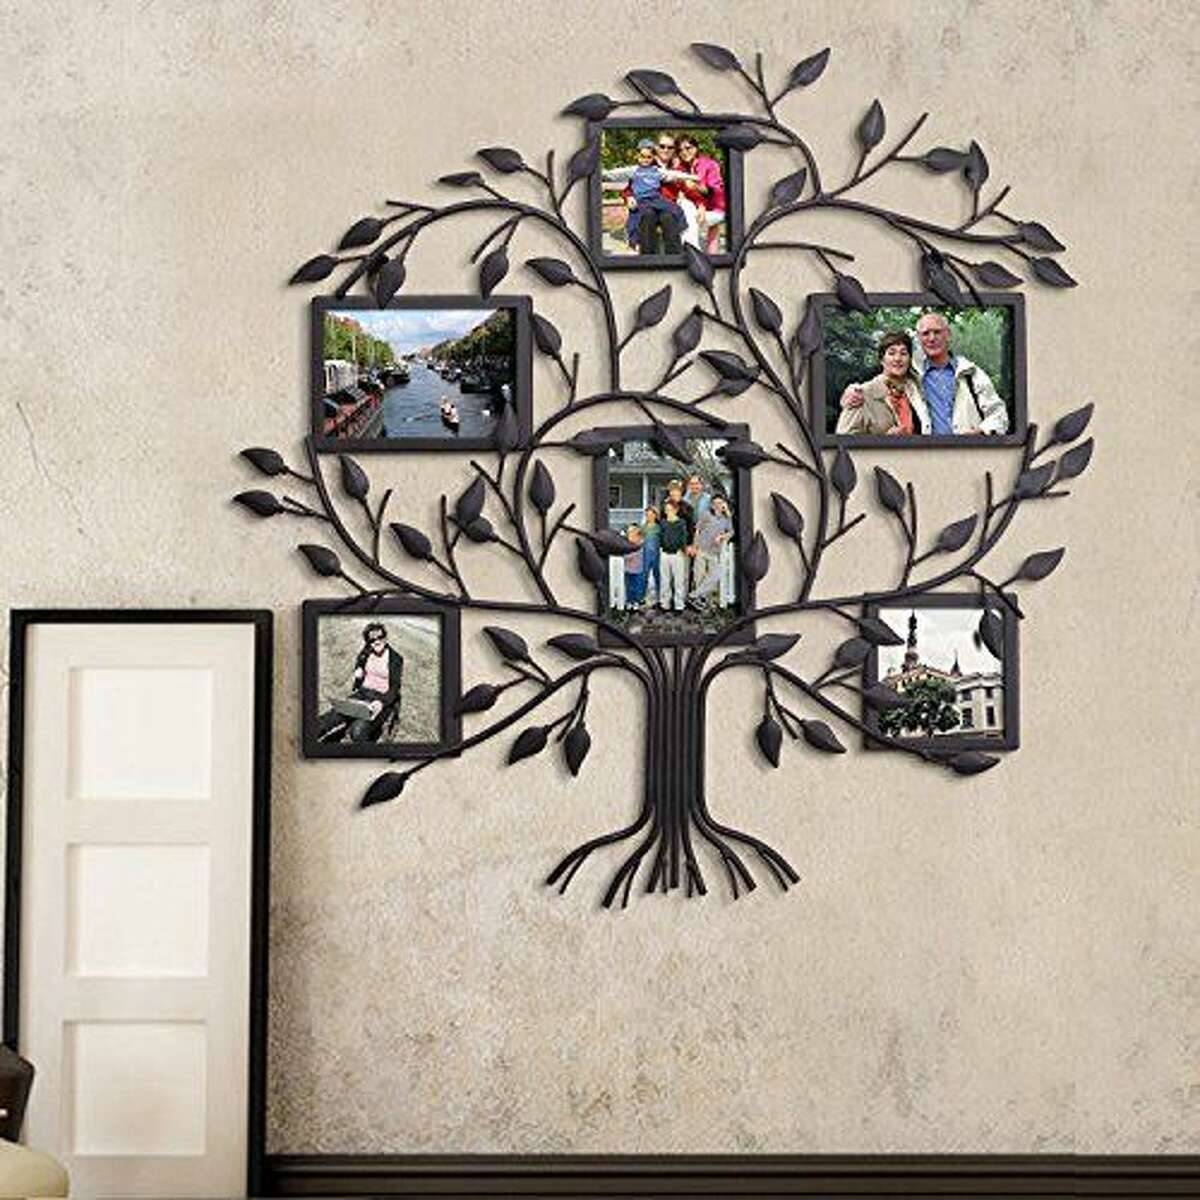 Family Tree Metal Wall Hanging: $59.99 Shop Now Give kids a glimpse into their ancestry with this eye-catching family tree that features six picture frames. Fill them with shots of their grandparents, cousins, you name it.